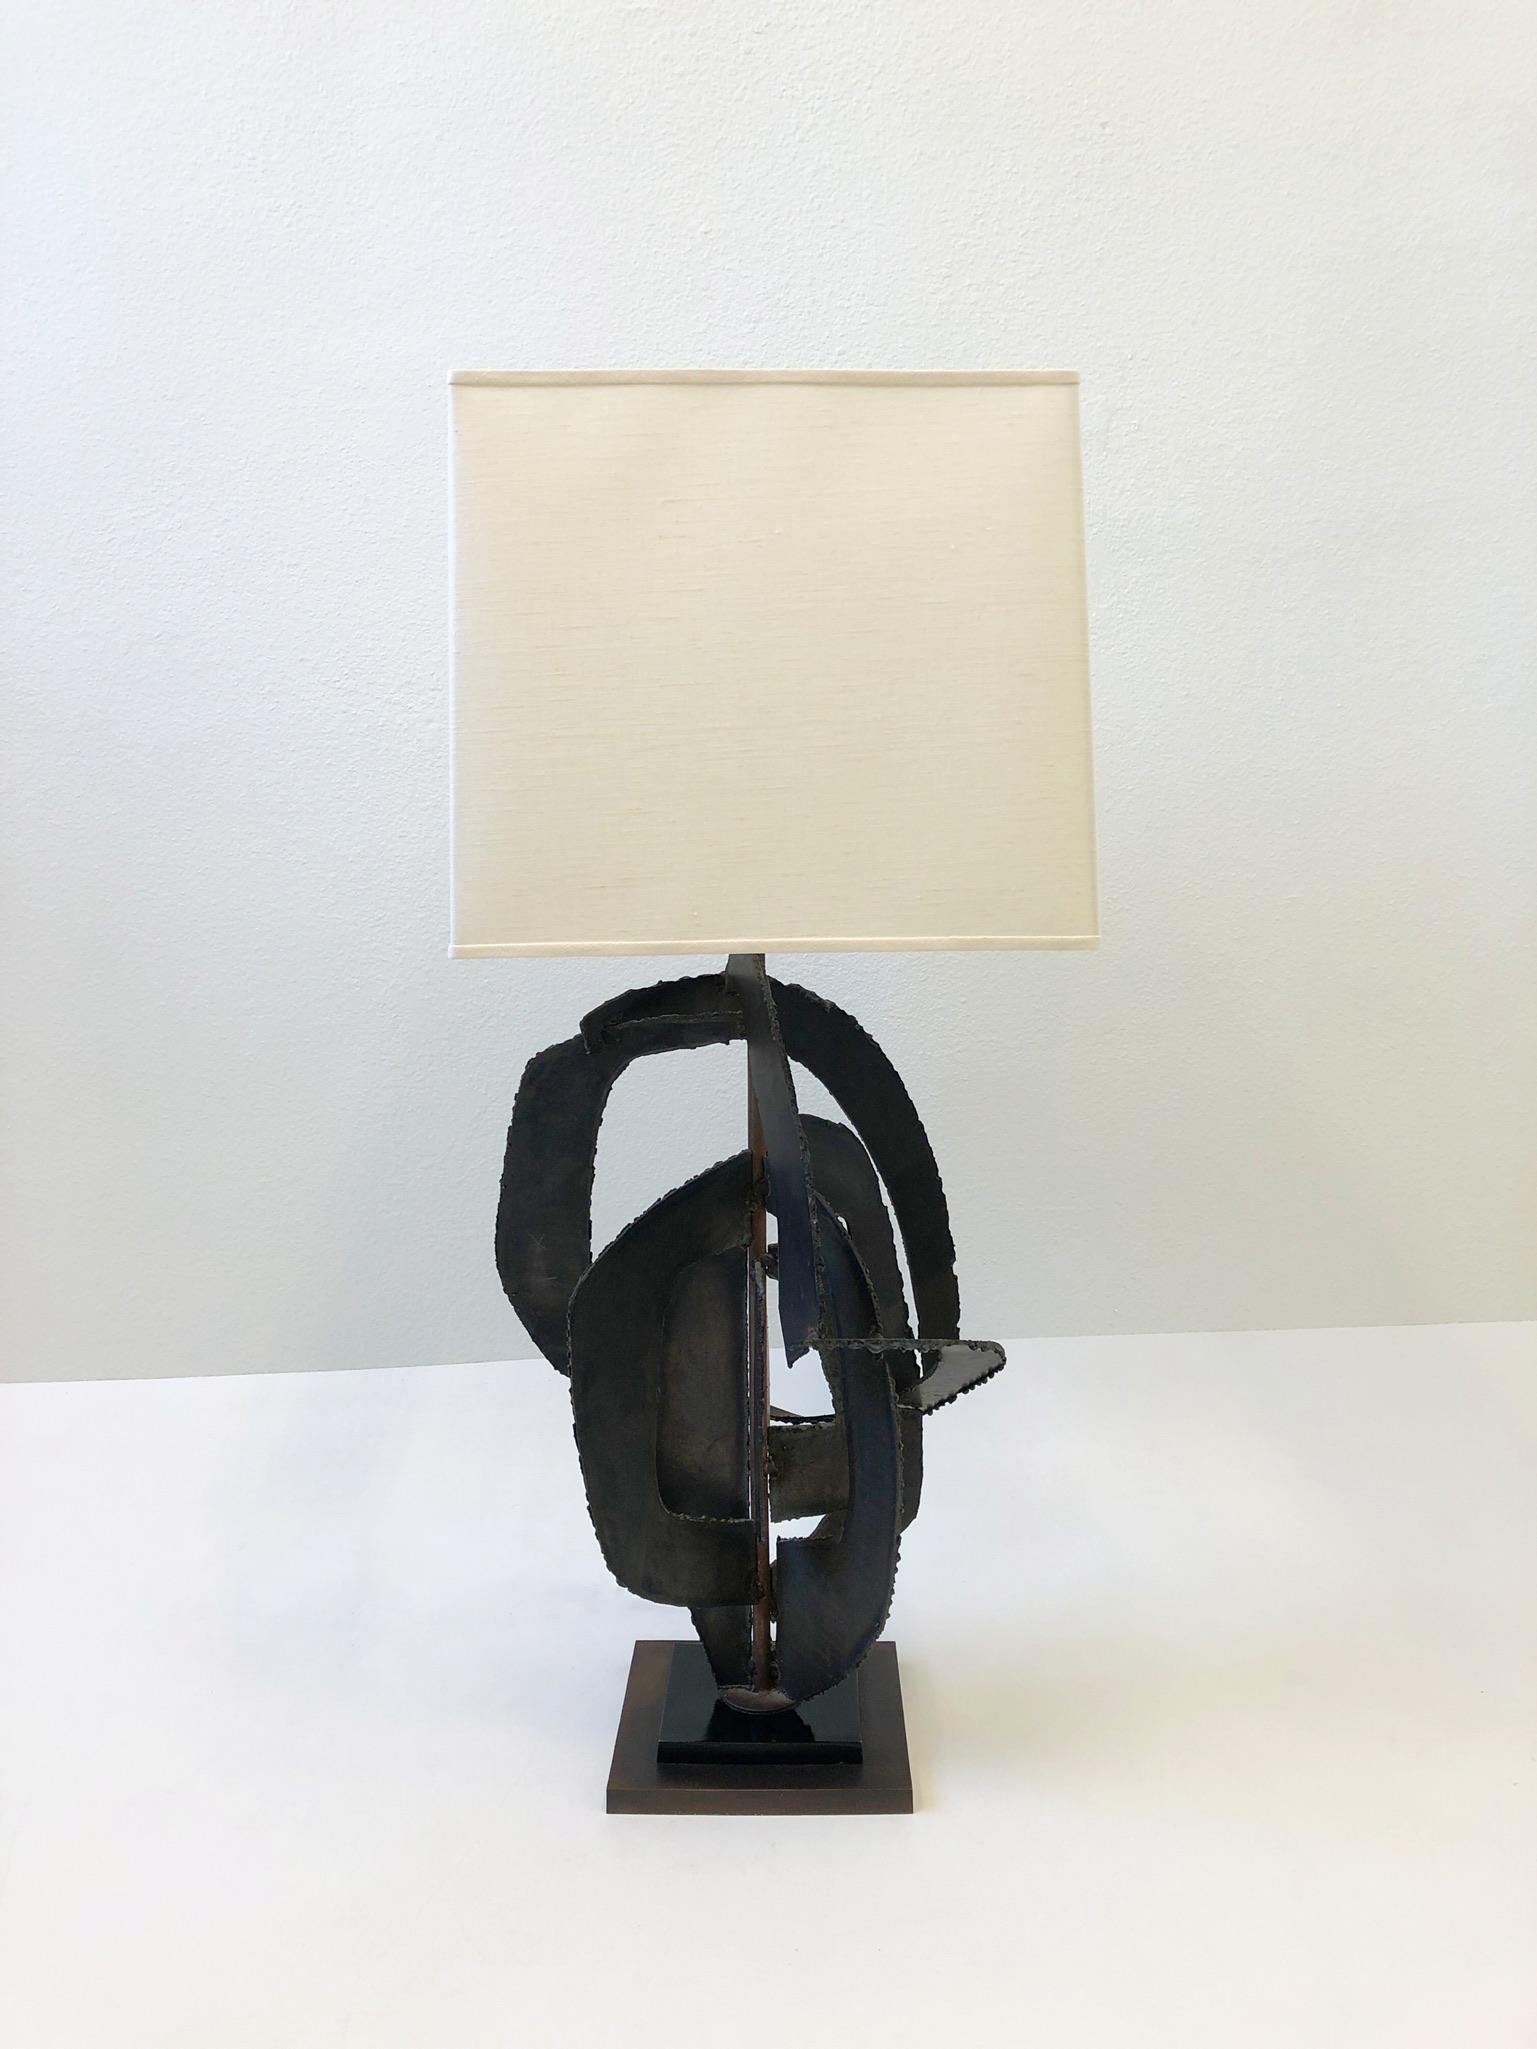 Brutalist table lamp design in the 1960s by Richard Barr for Laurel Lamp Company. Constructed of torch-cut steel that’s welded together to form an abstract sculpture. The square base is black lacquered and bronze finish. Newly rewired and new